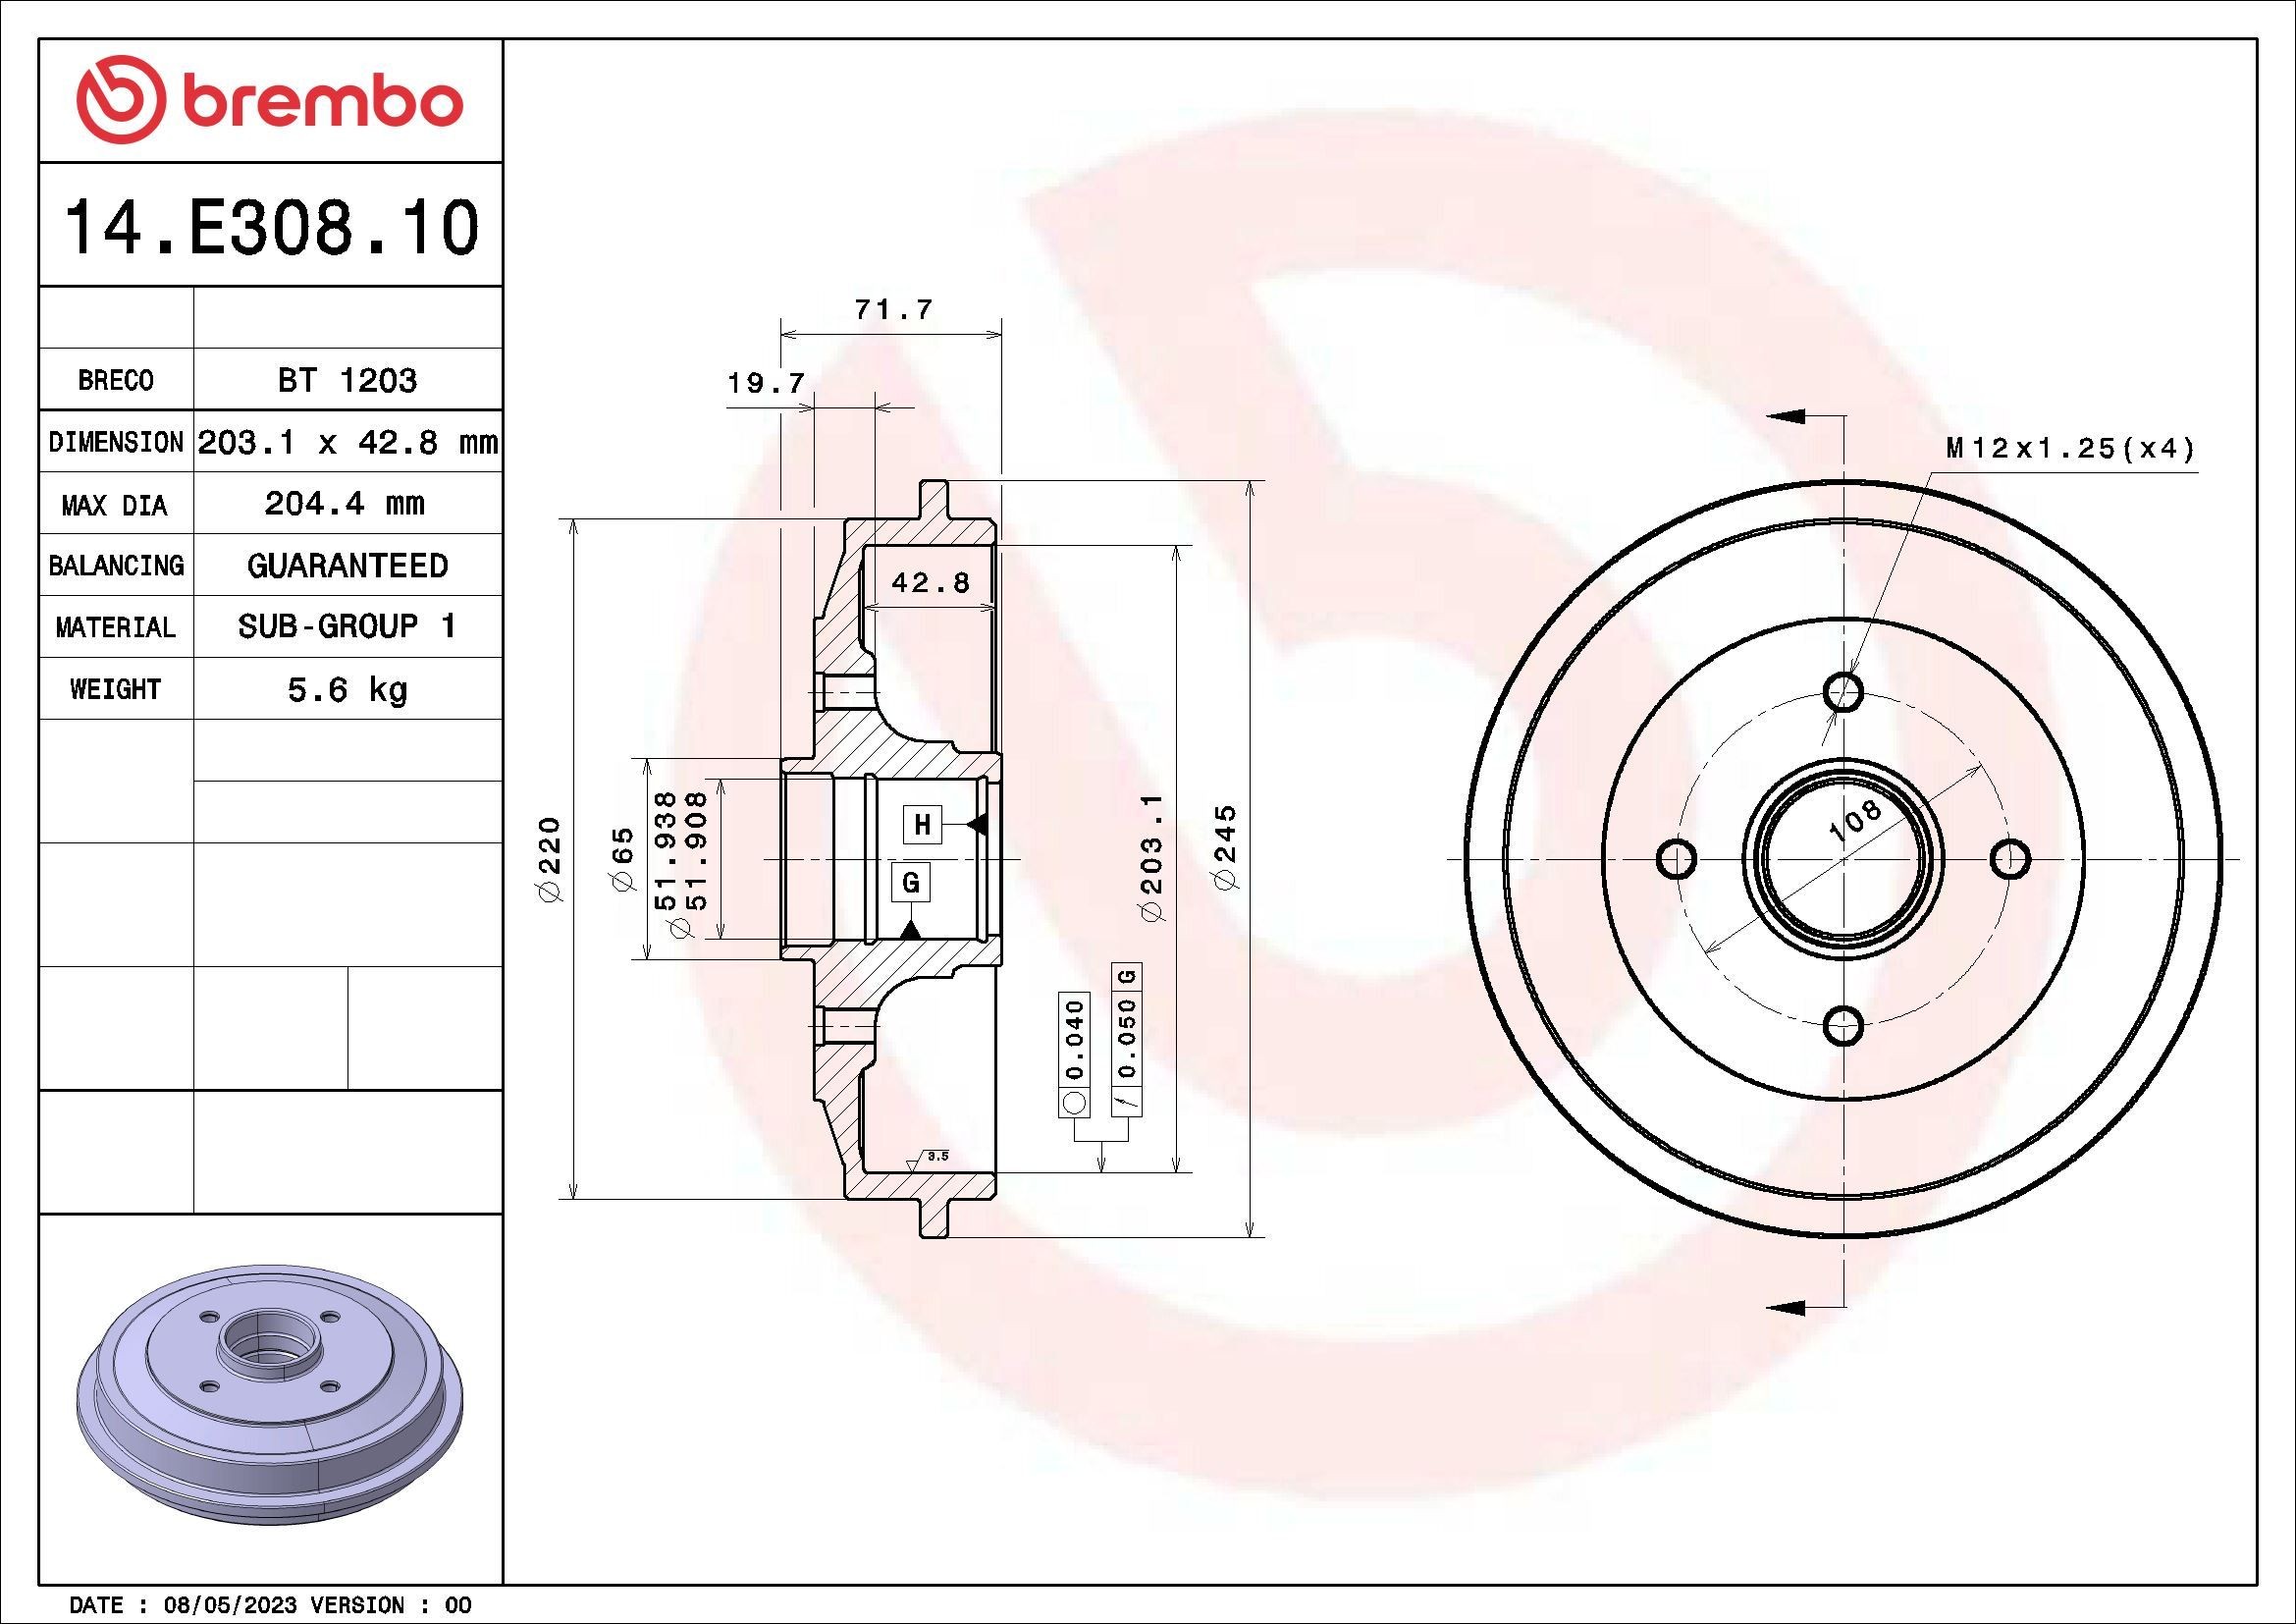 BREMBO 14.E308.10 Brake Drum PEUGEOT experience and price